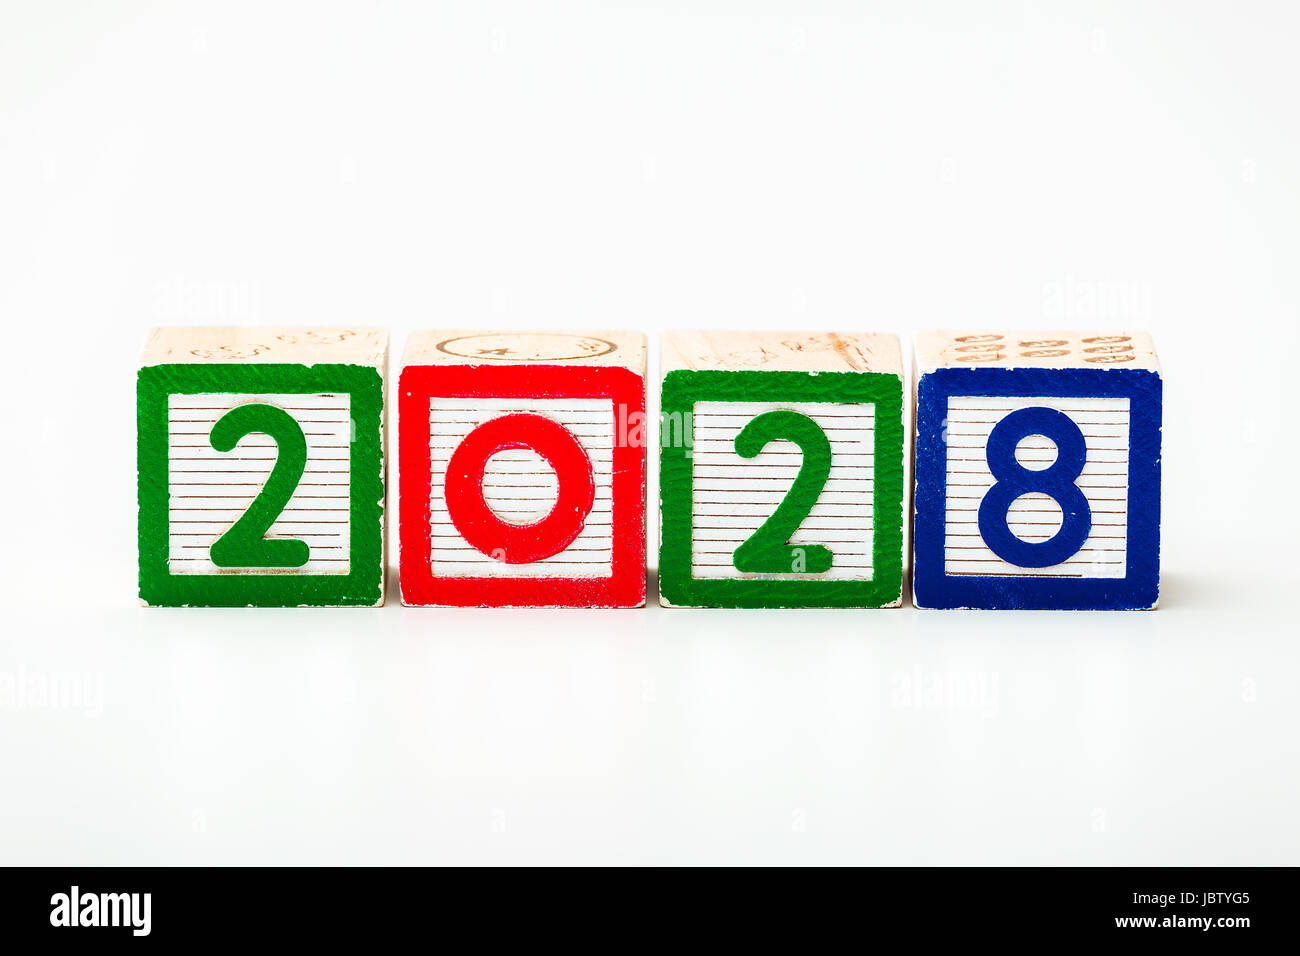 Wooden block for year 2028 Stock Photo